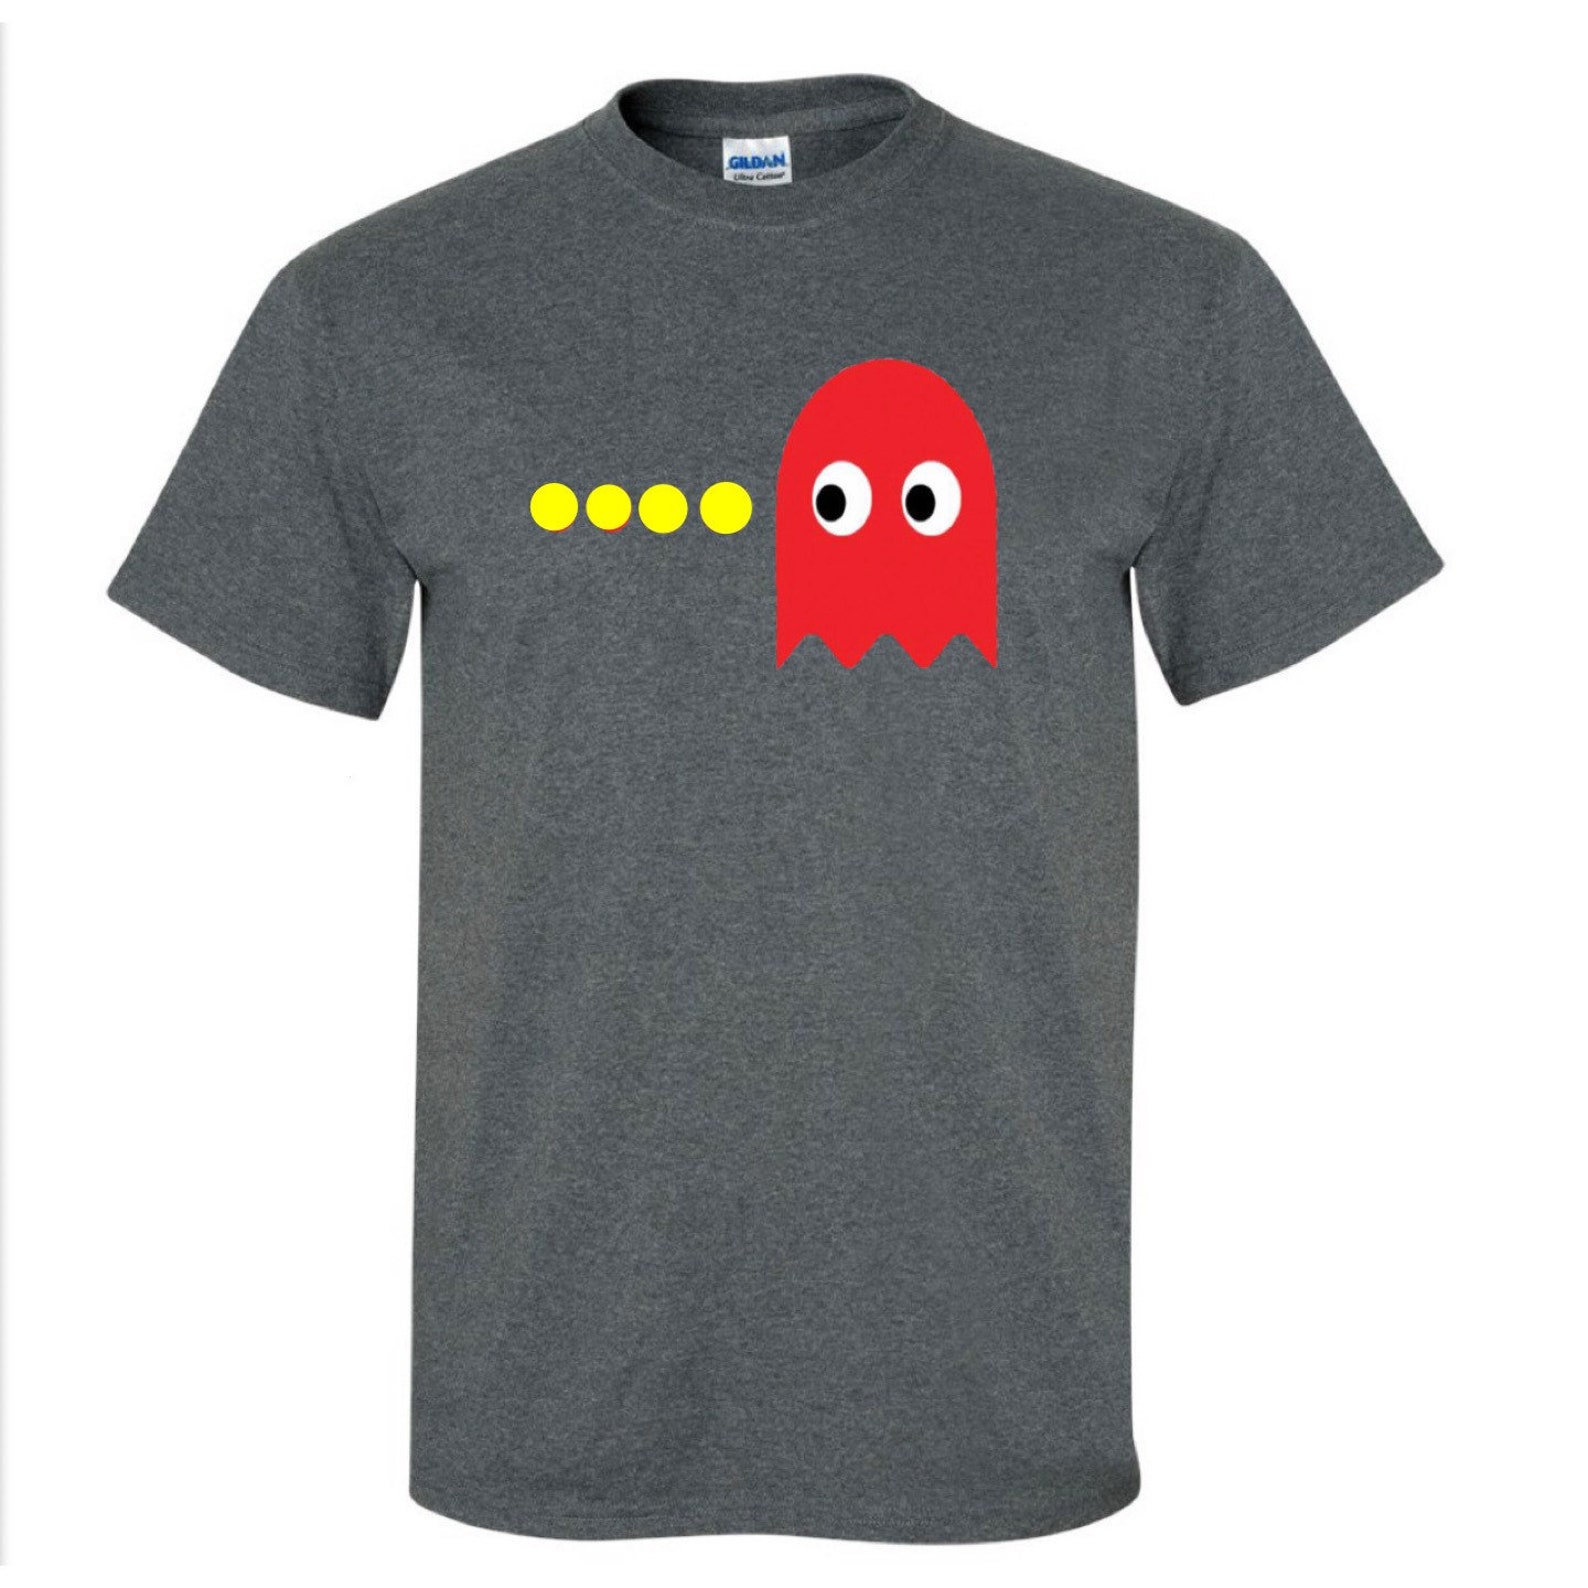 Couples Matching T-Shirts Pac-man & Ghost Classic Video | Etsy